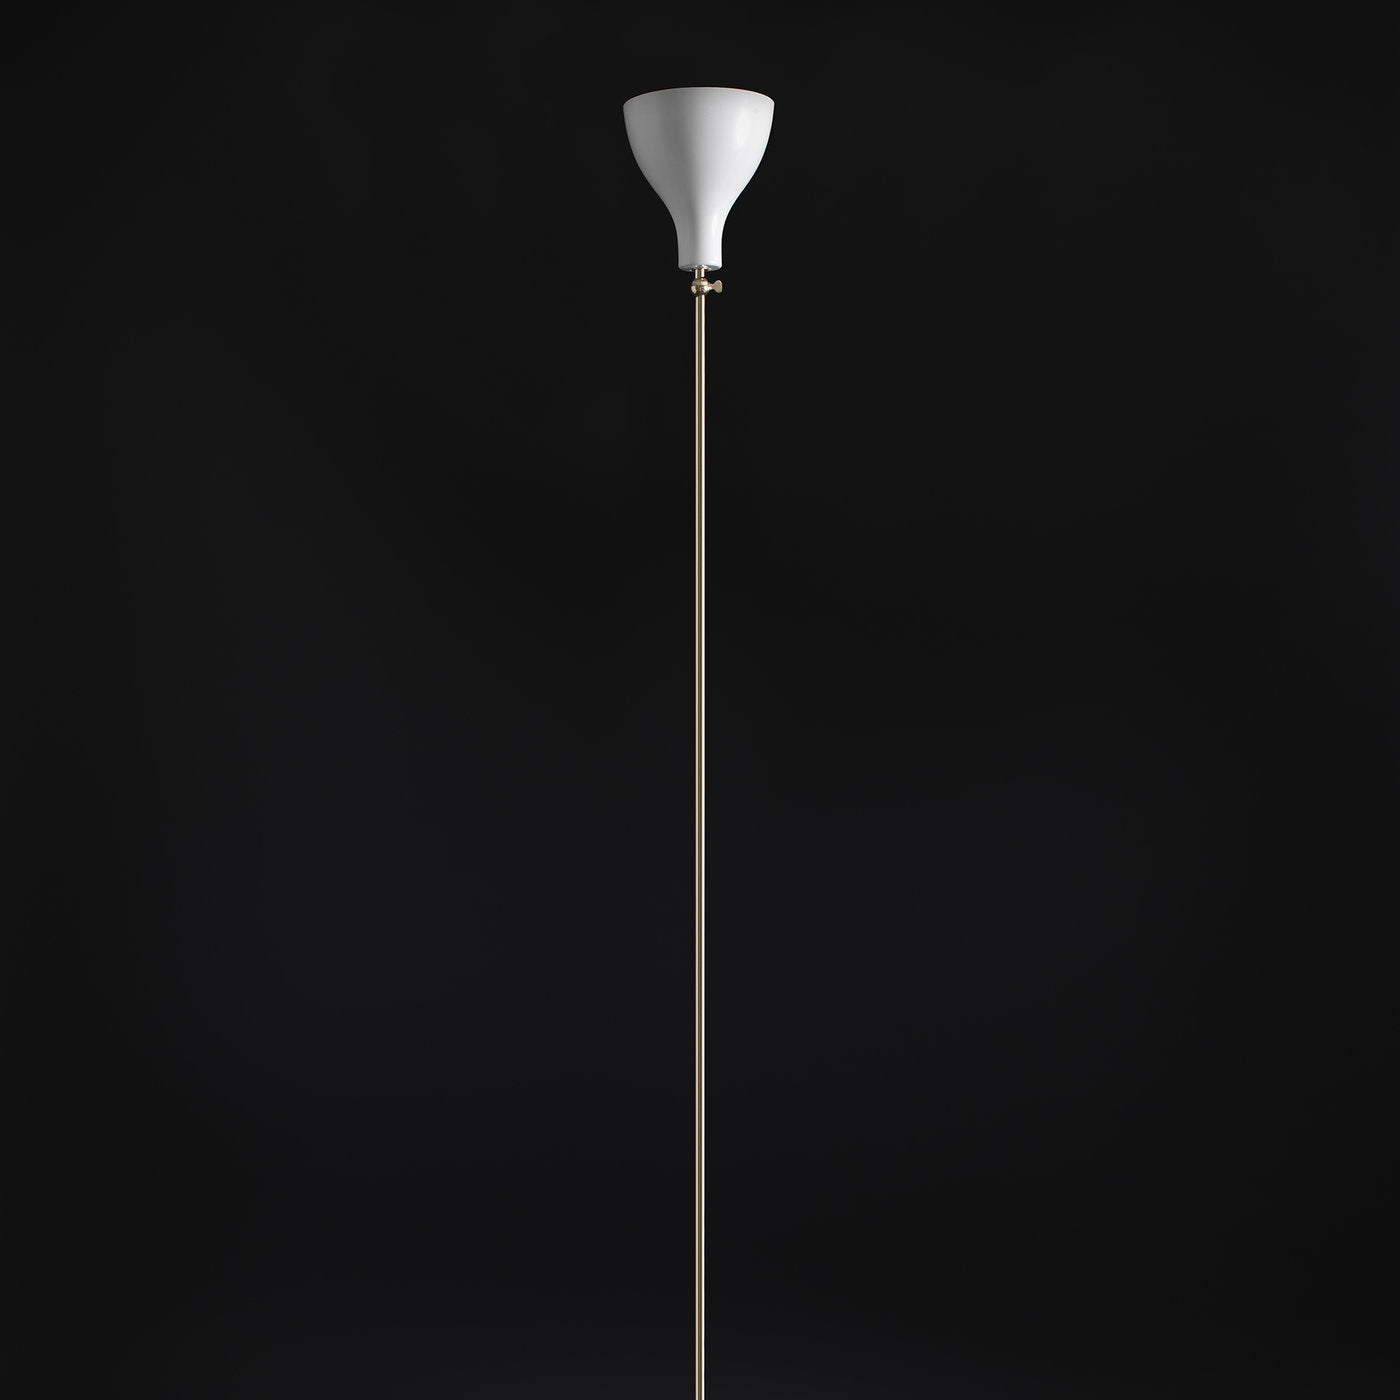 Lady V Black and White Tall Floor Lamp in Brass - Alternative view 5